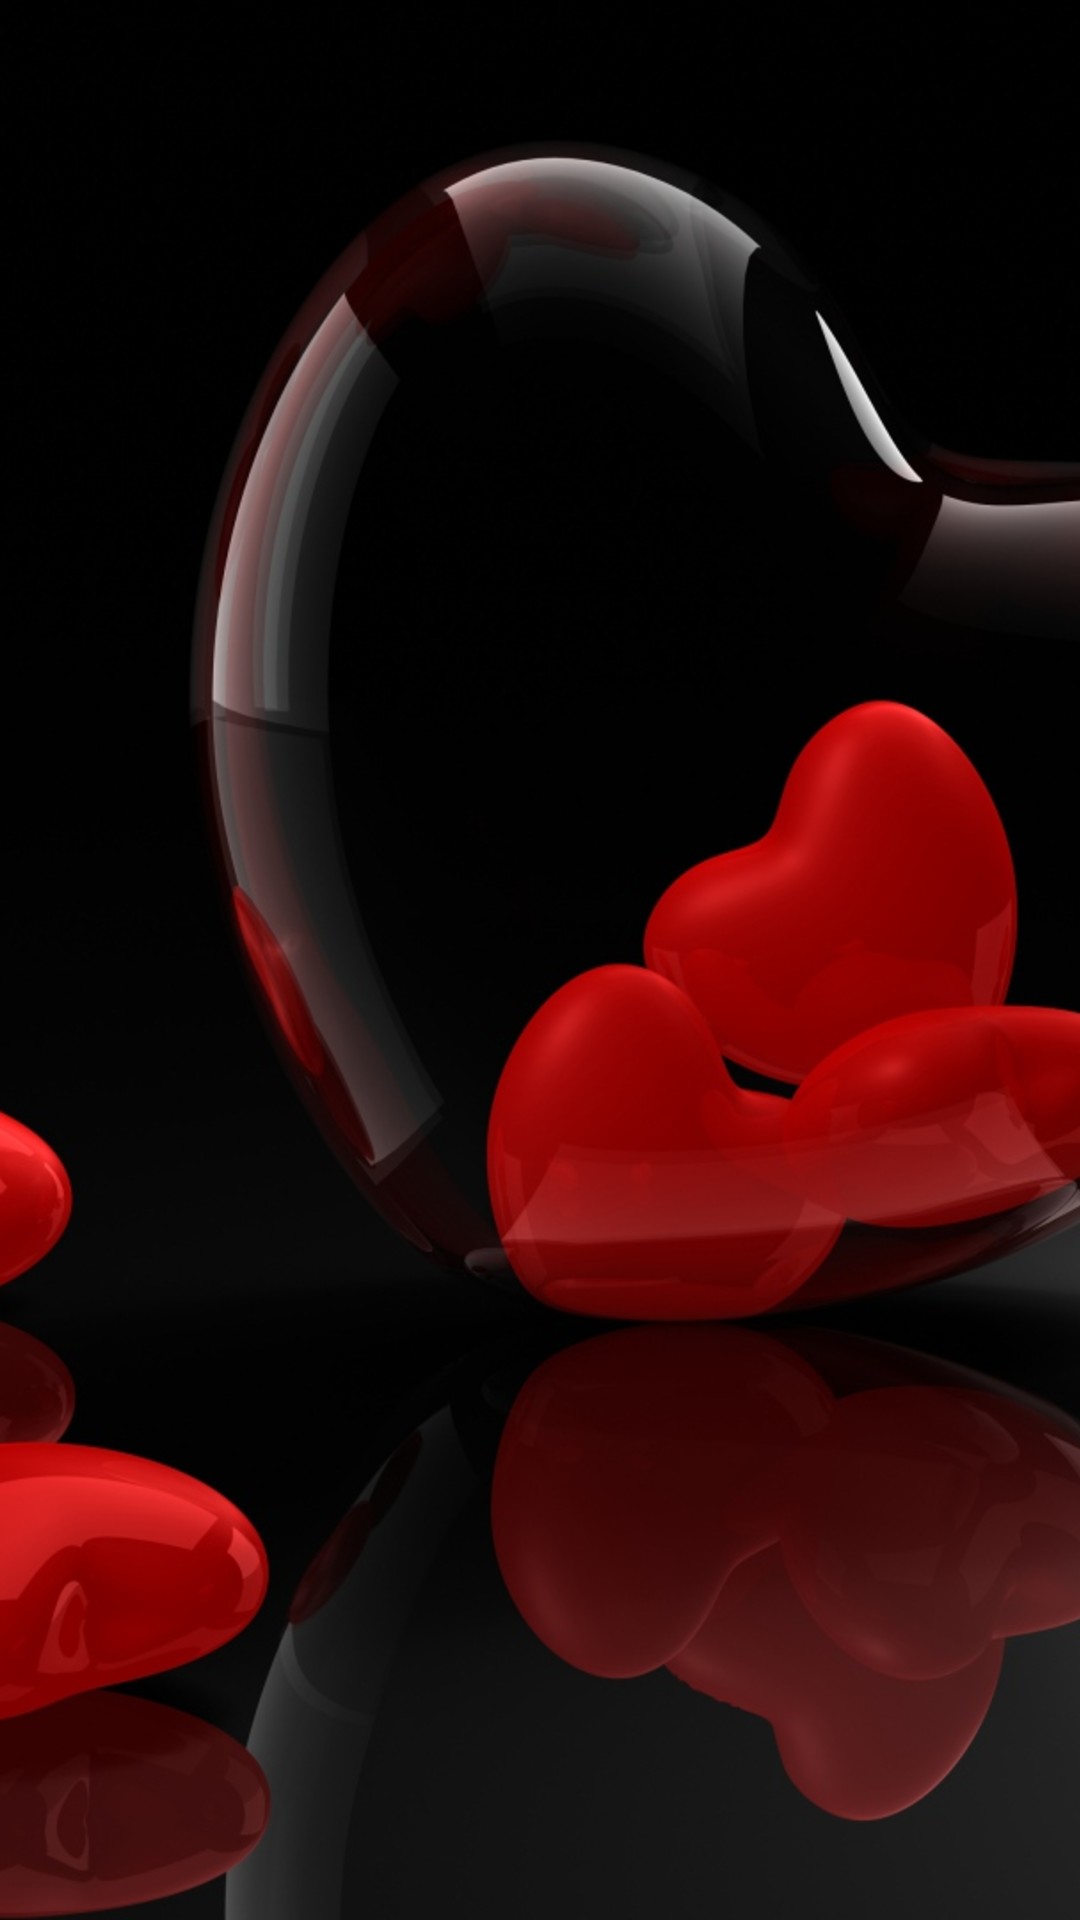 50 Red Hearts Black Background On Wallpapersafari